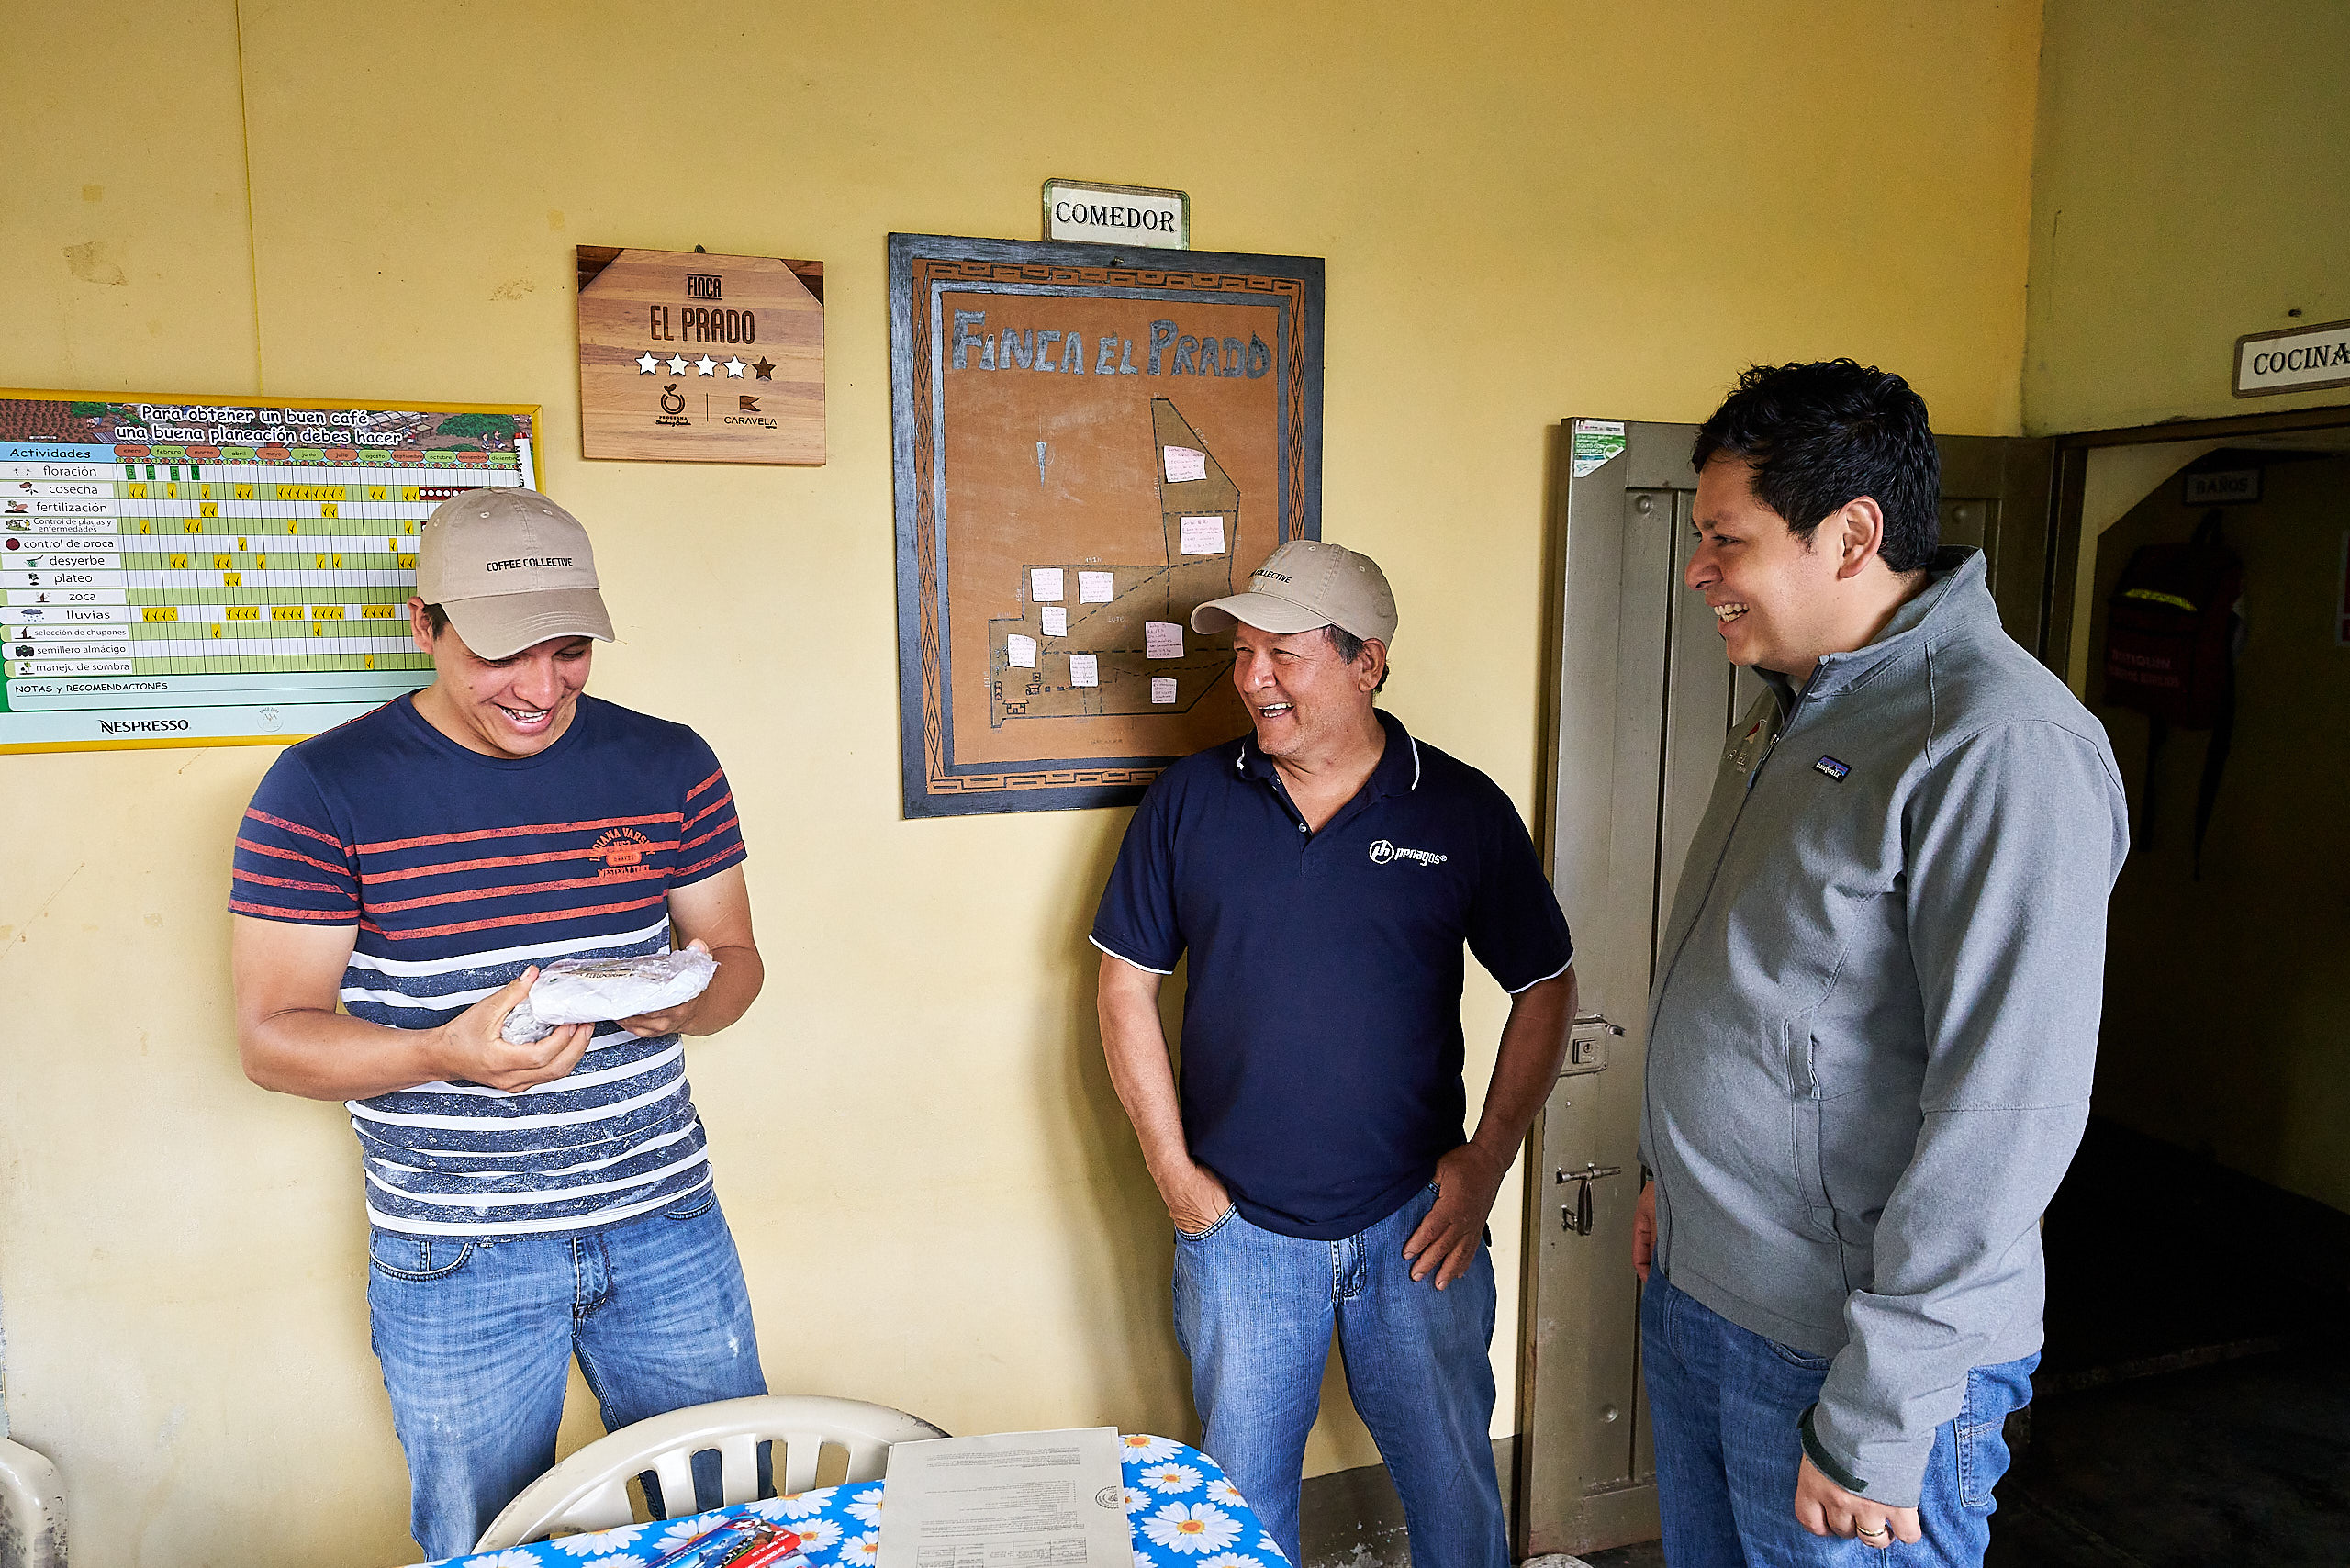 Jaime Andrés and his father Don Jaime received a French, unpasteurised cheese 